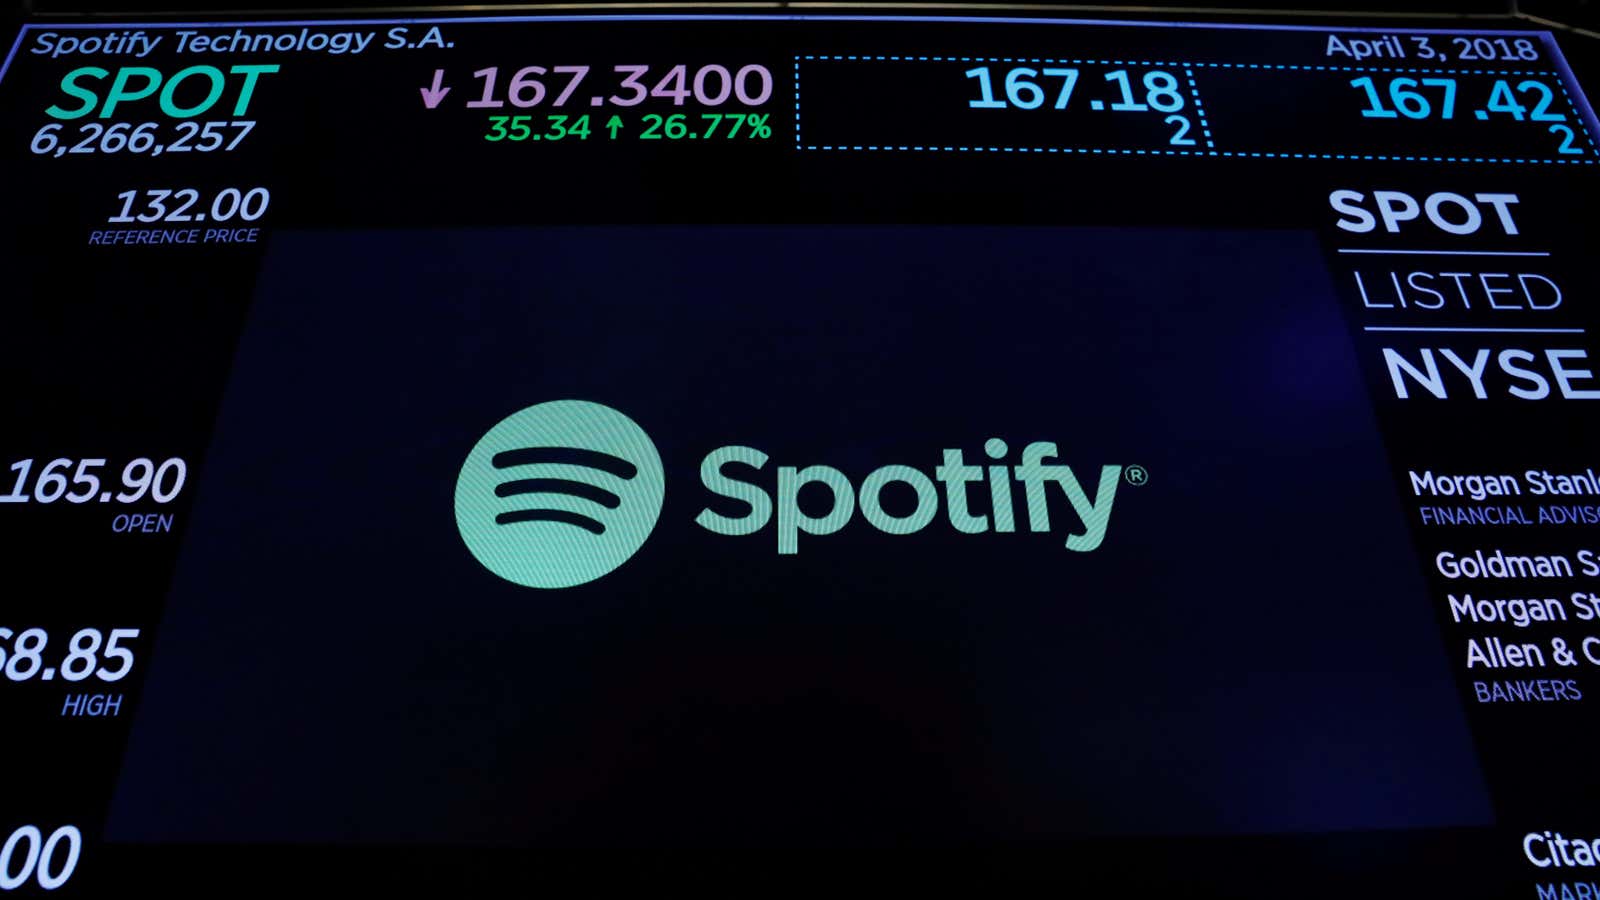 A video screen showing the Spotify logo.